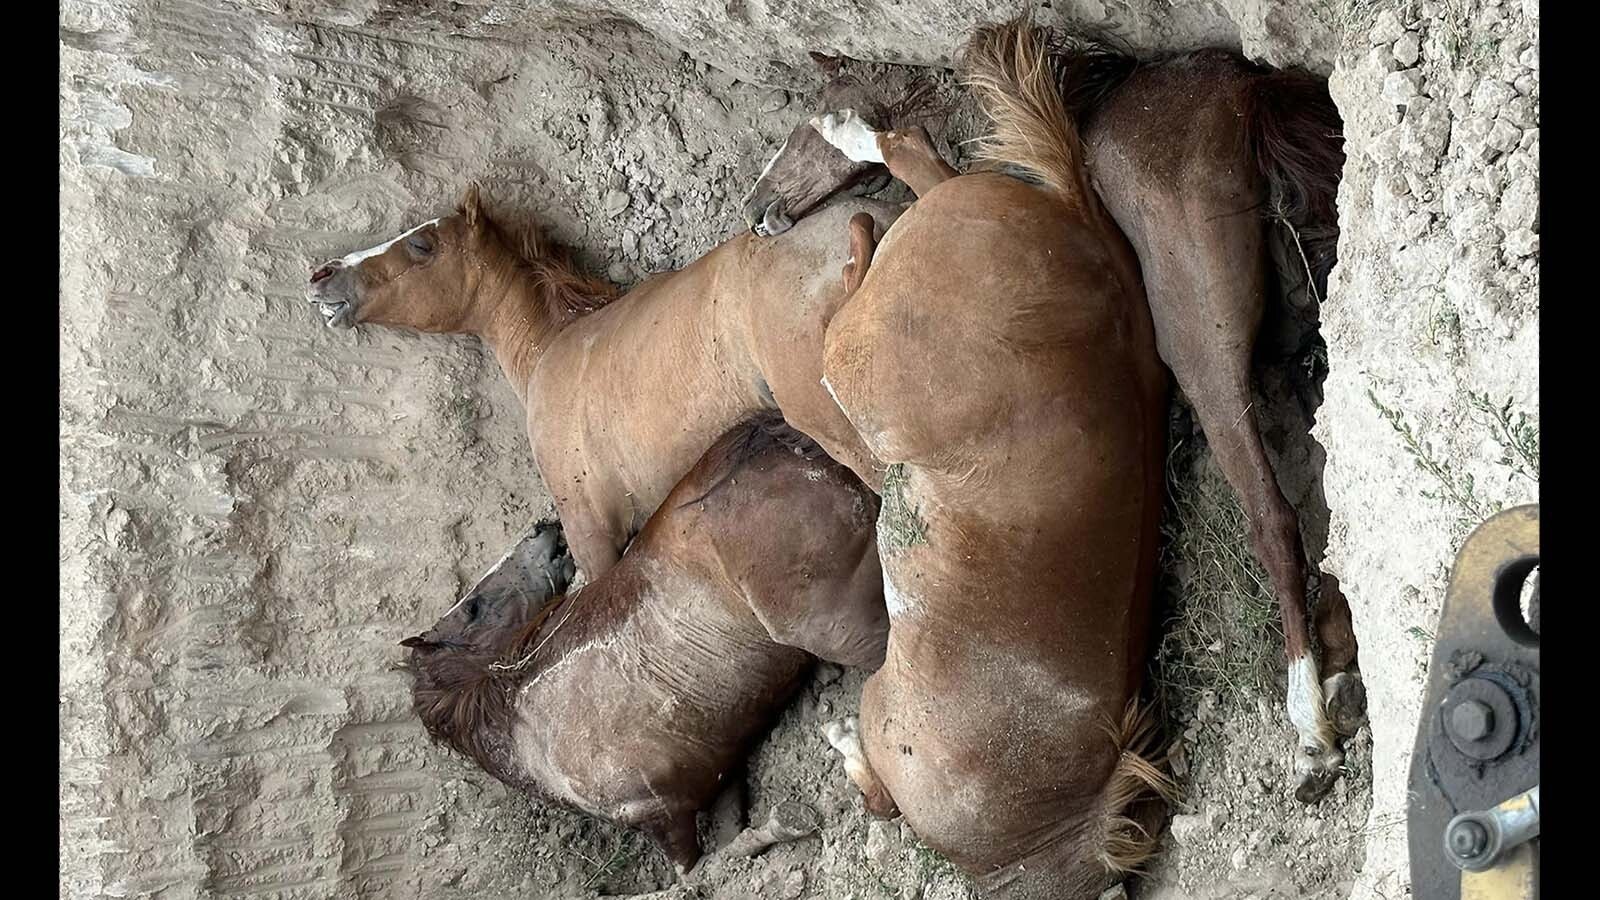 These four horses owned by Joe and Lindsay Bright of Converse County, Wyoming, were found dead July 31, 2023. An investigation is ongoing, but the owners say they believe their horses were poisoned.